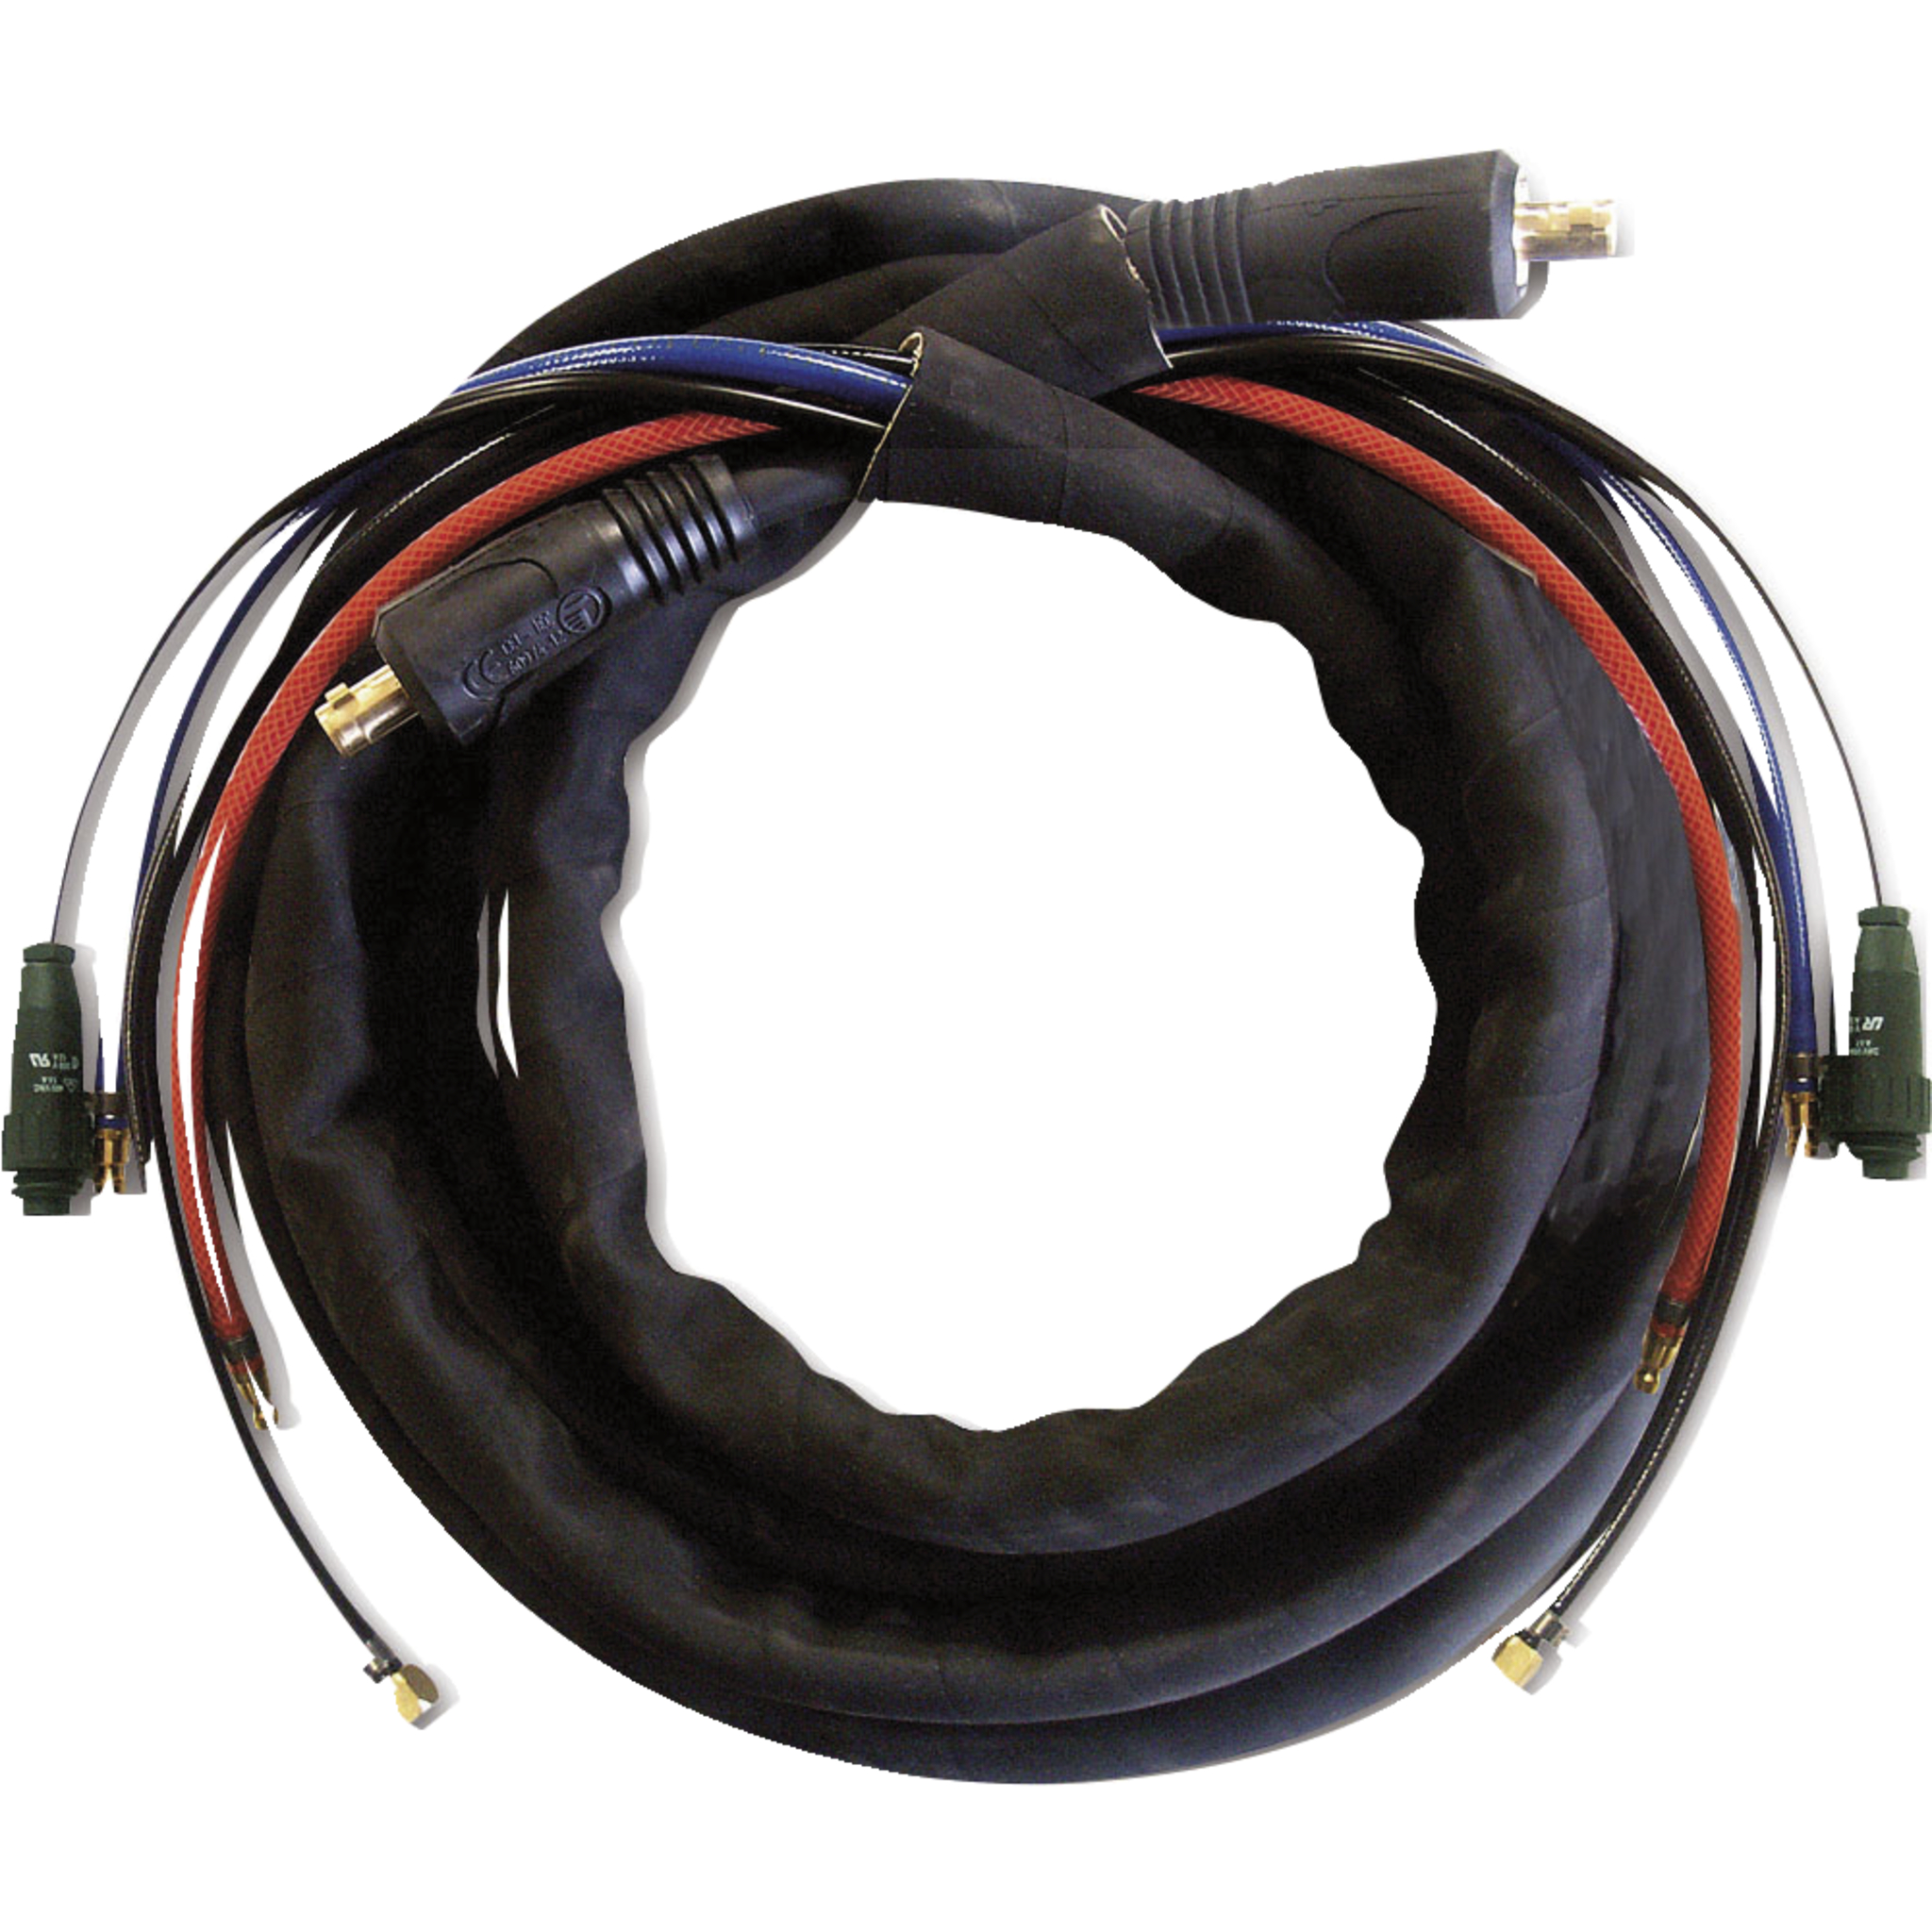 10m Water Cooled Connection Cable 70mm2 to suit NeoPulse